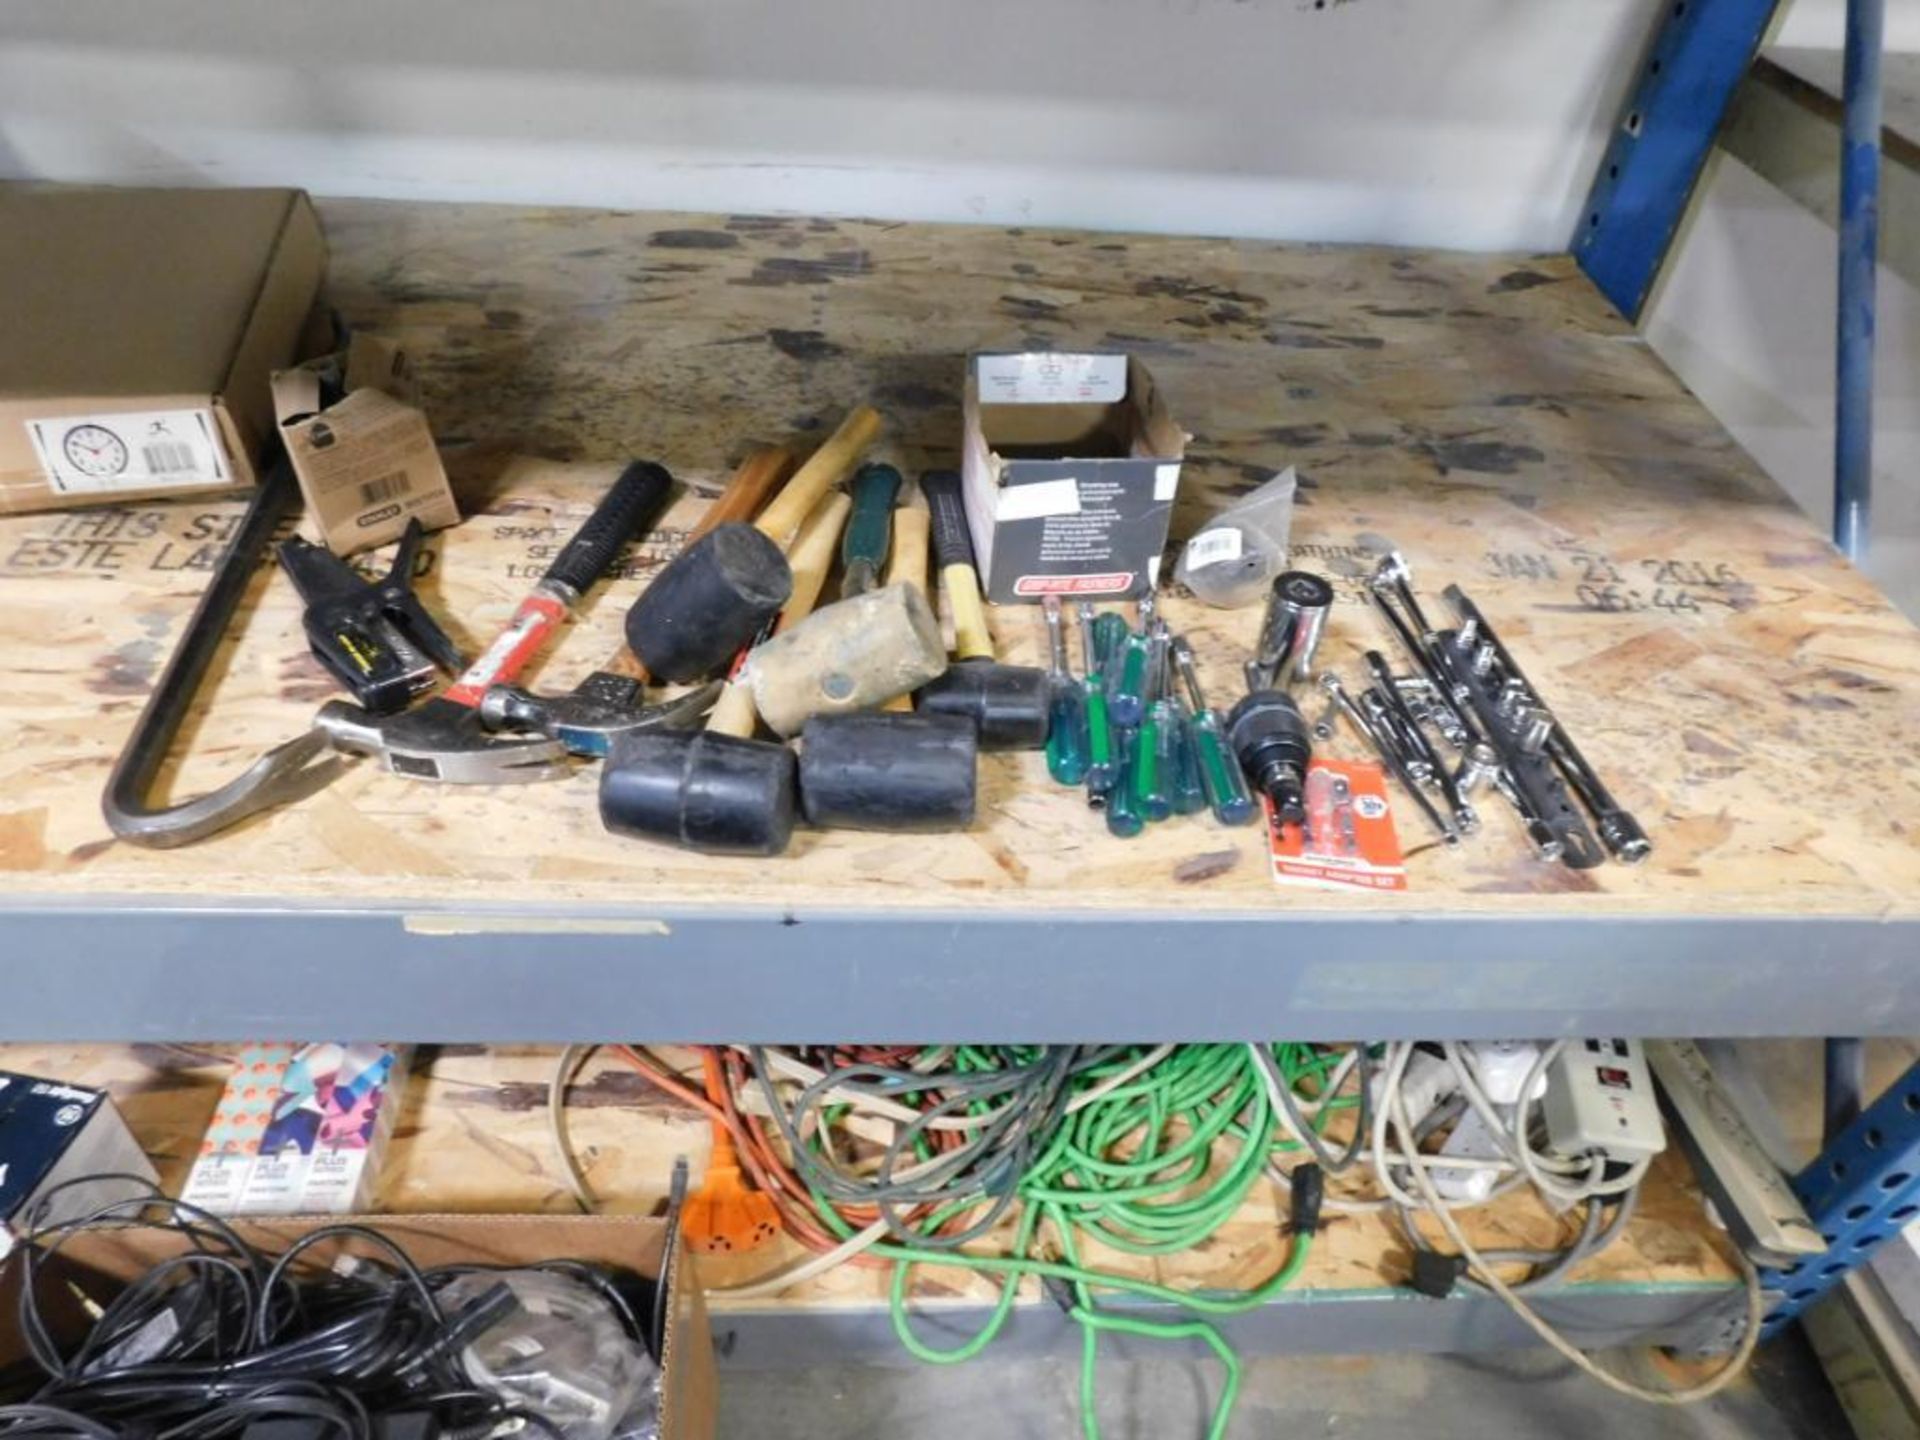 LOT: Contents of Racking including Large Assortment of Tools, Wrenches, Screw Drivers, Allen Wrenche - Image 5 of 5